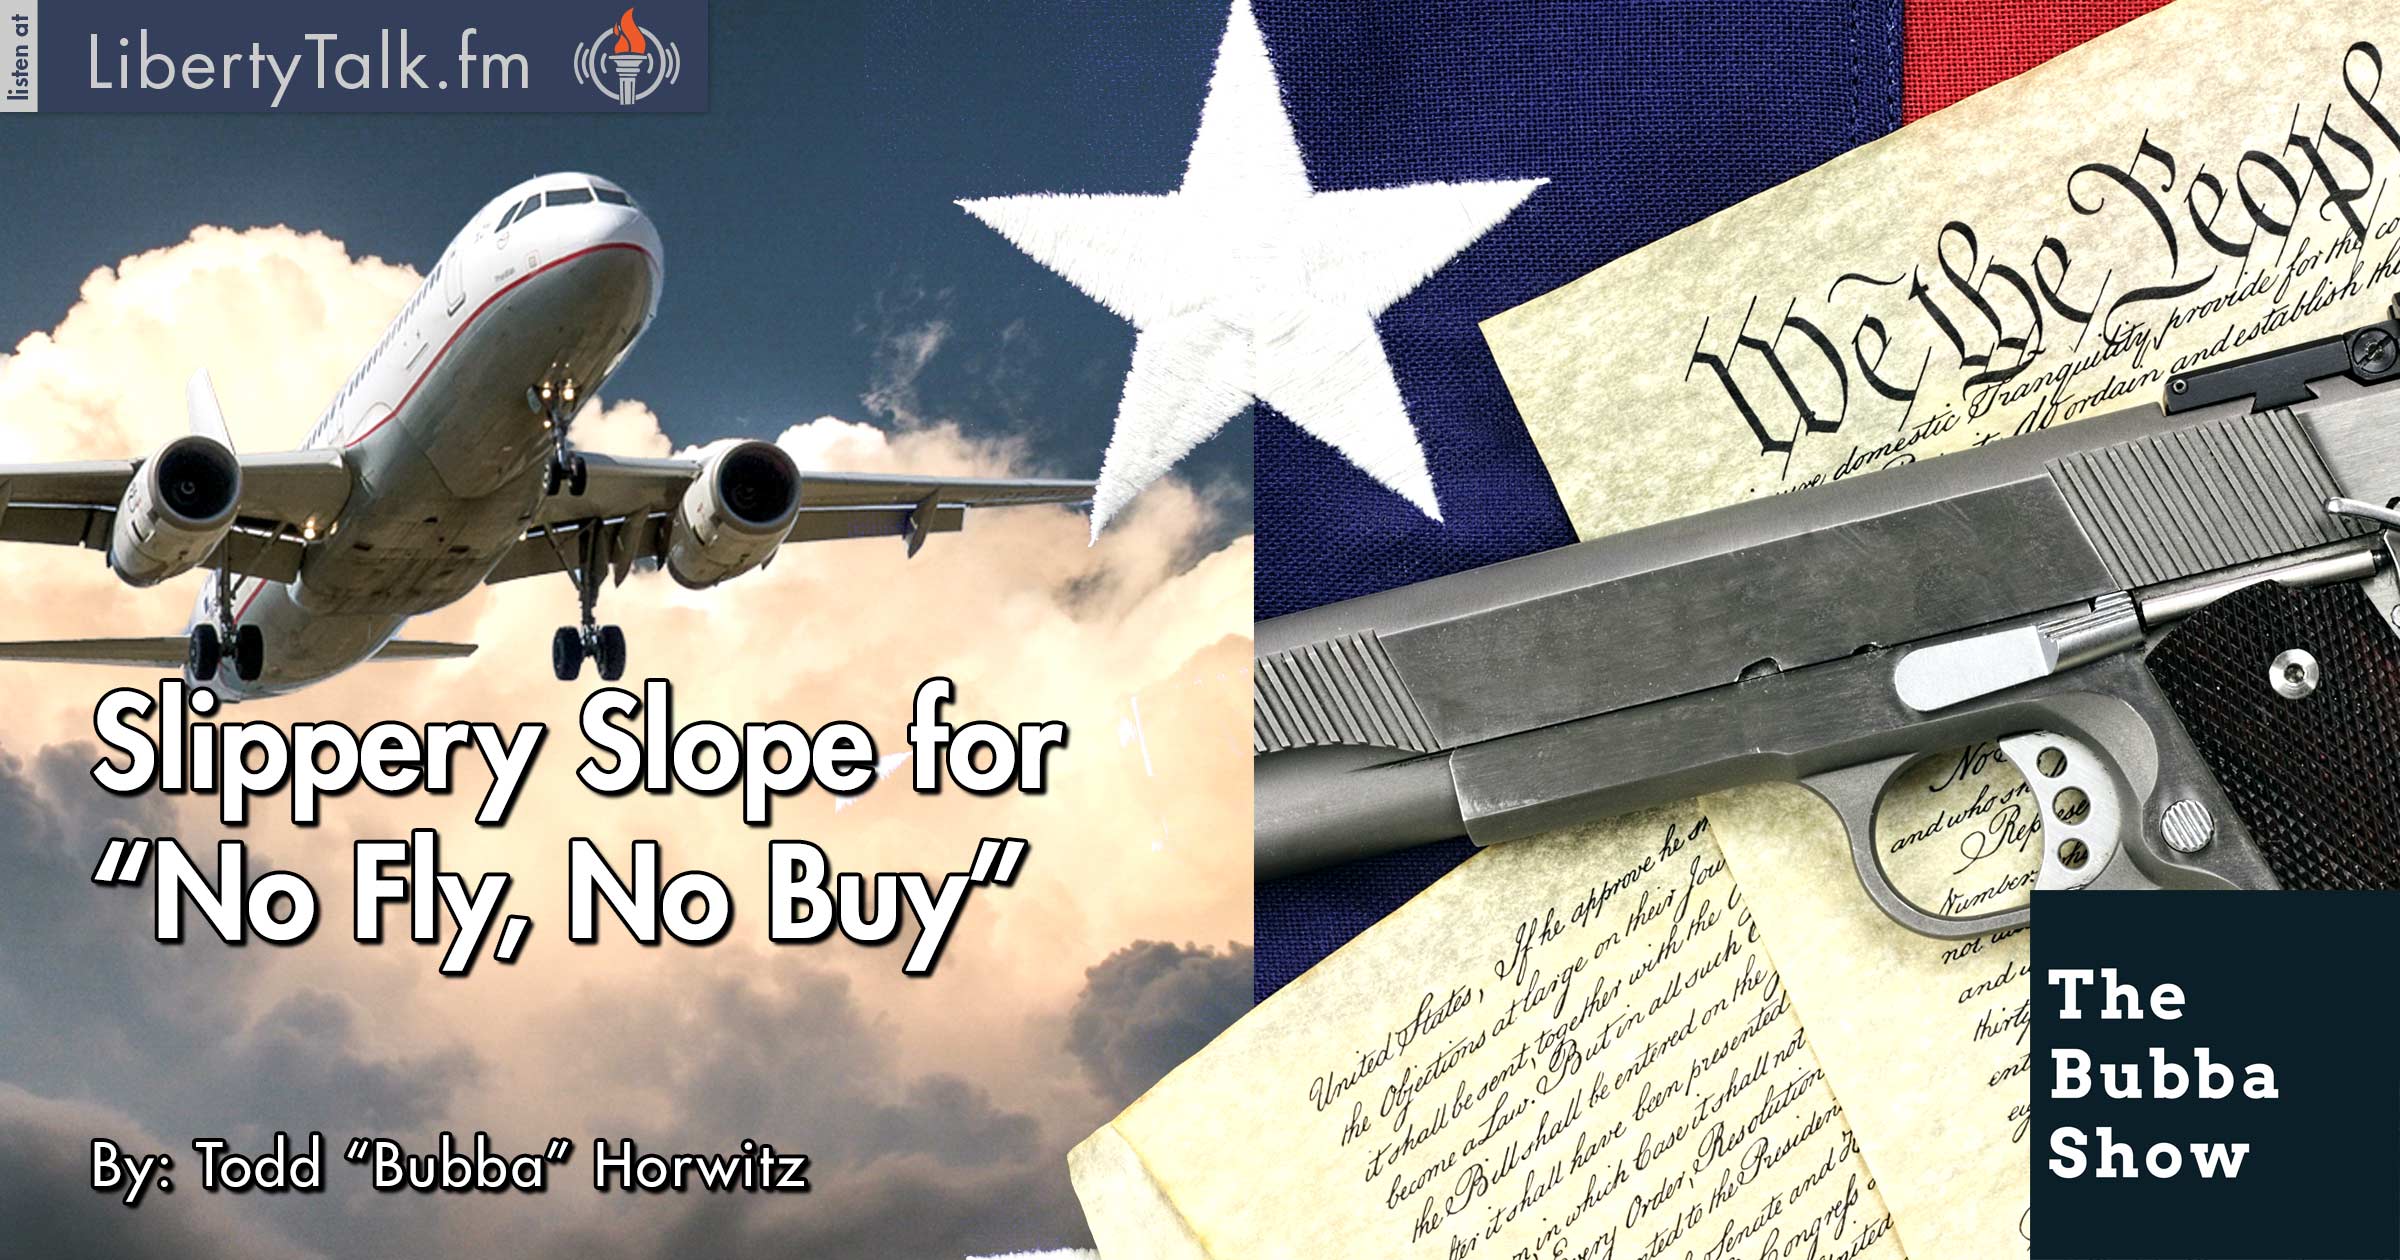 Slippery Slope for “No Fly, No Buy” - The Bubba Show